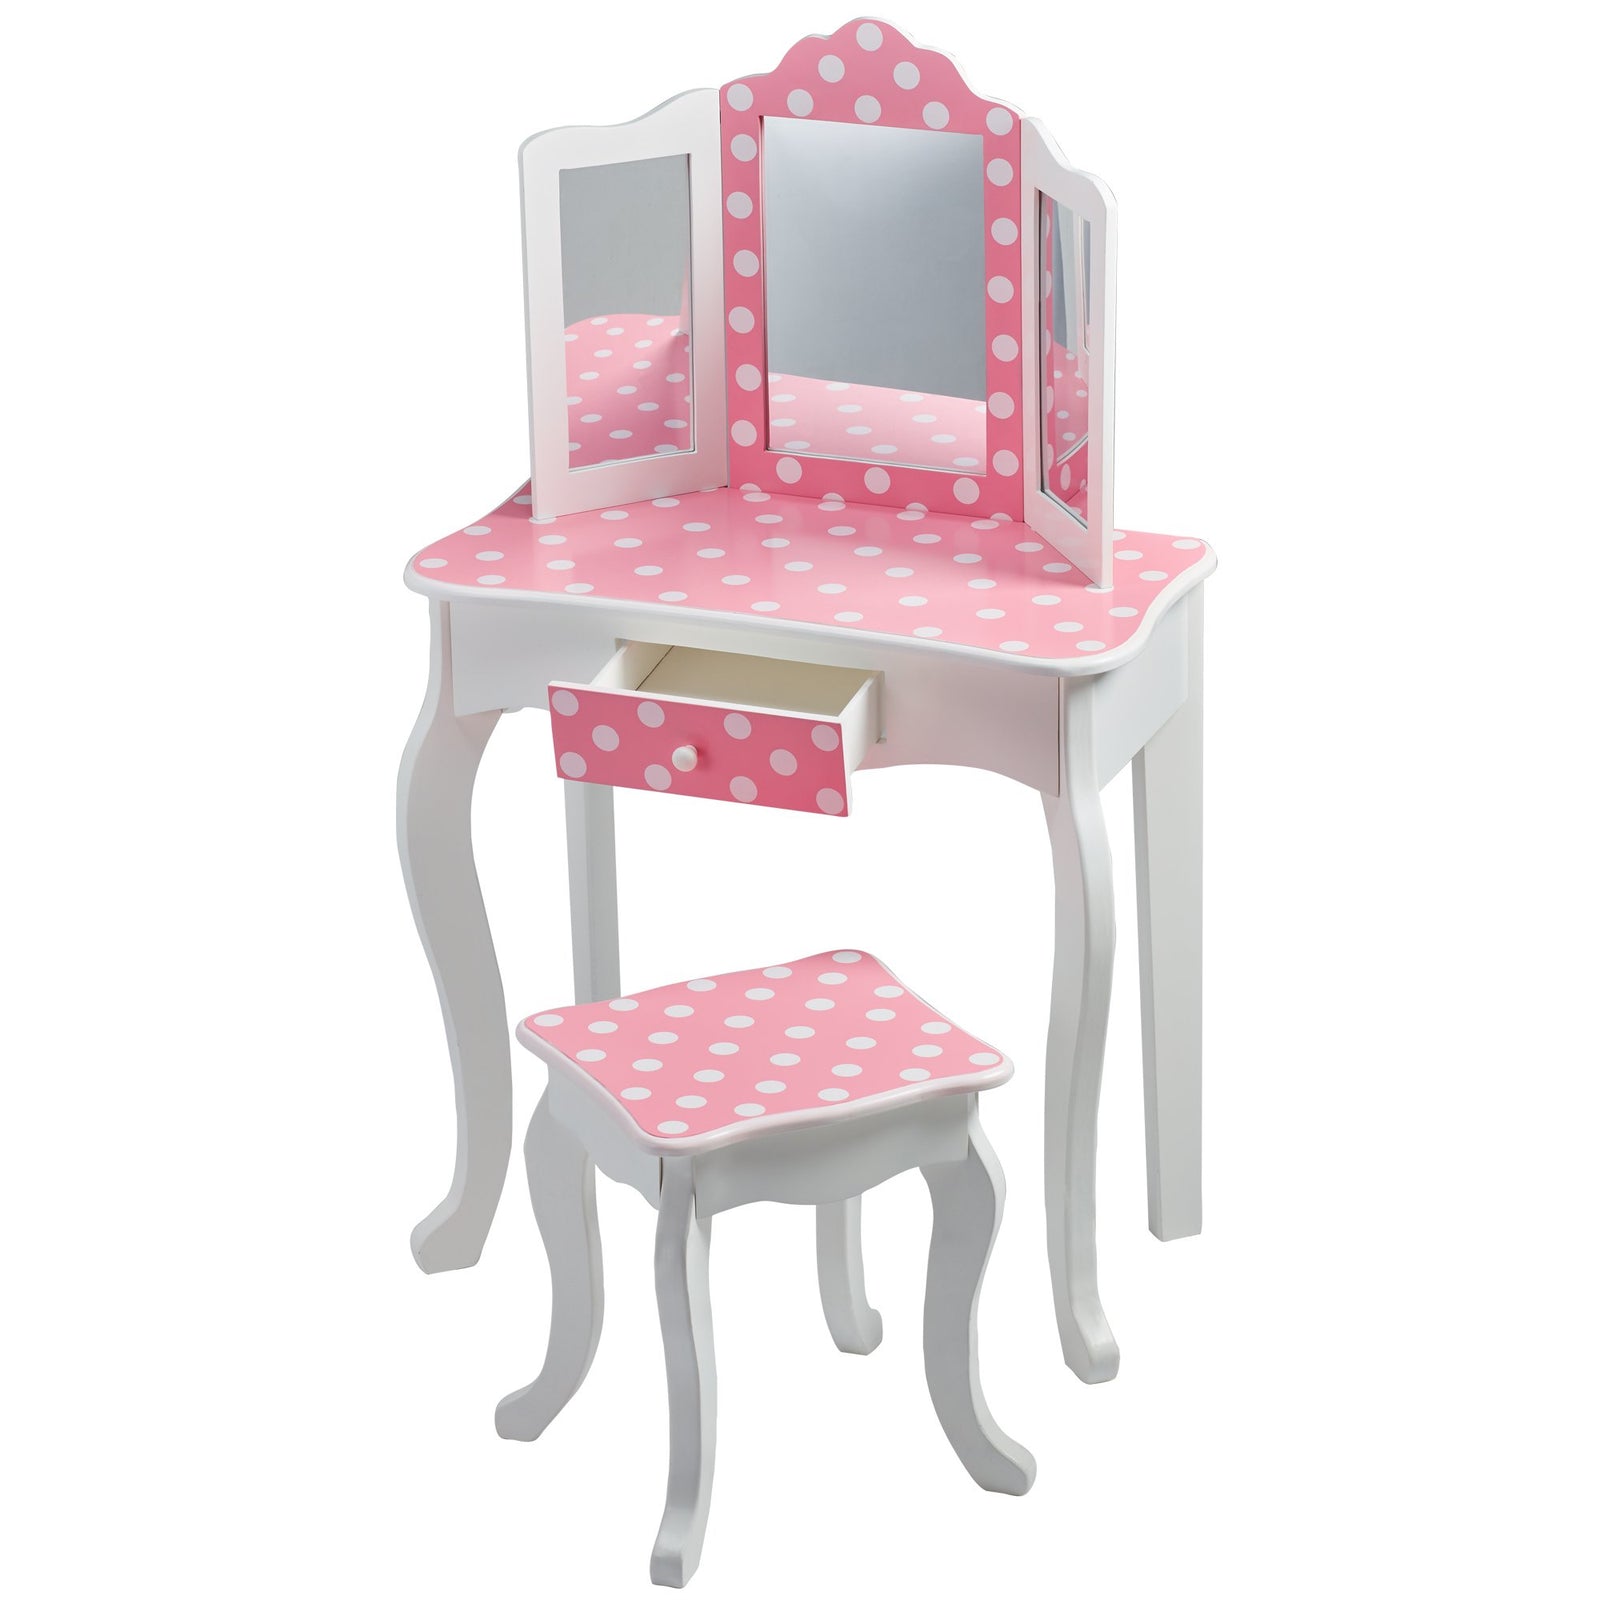 Teamson Kids Gisele Polka Dot Wooden Vanity Set with Tri-Fold Mirror and Chair Table & Stool Set, Pink/White